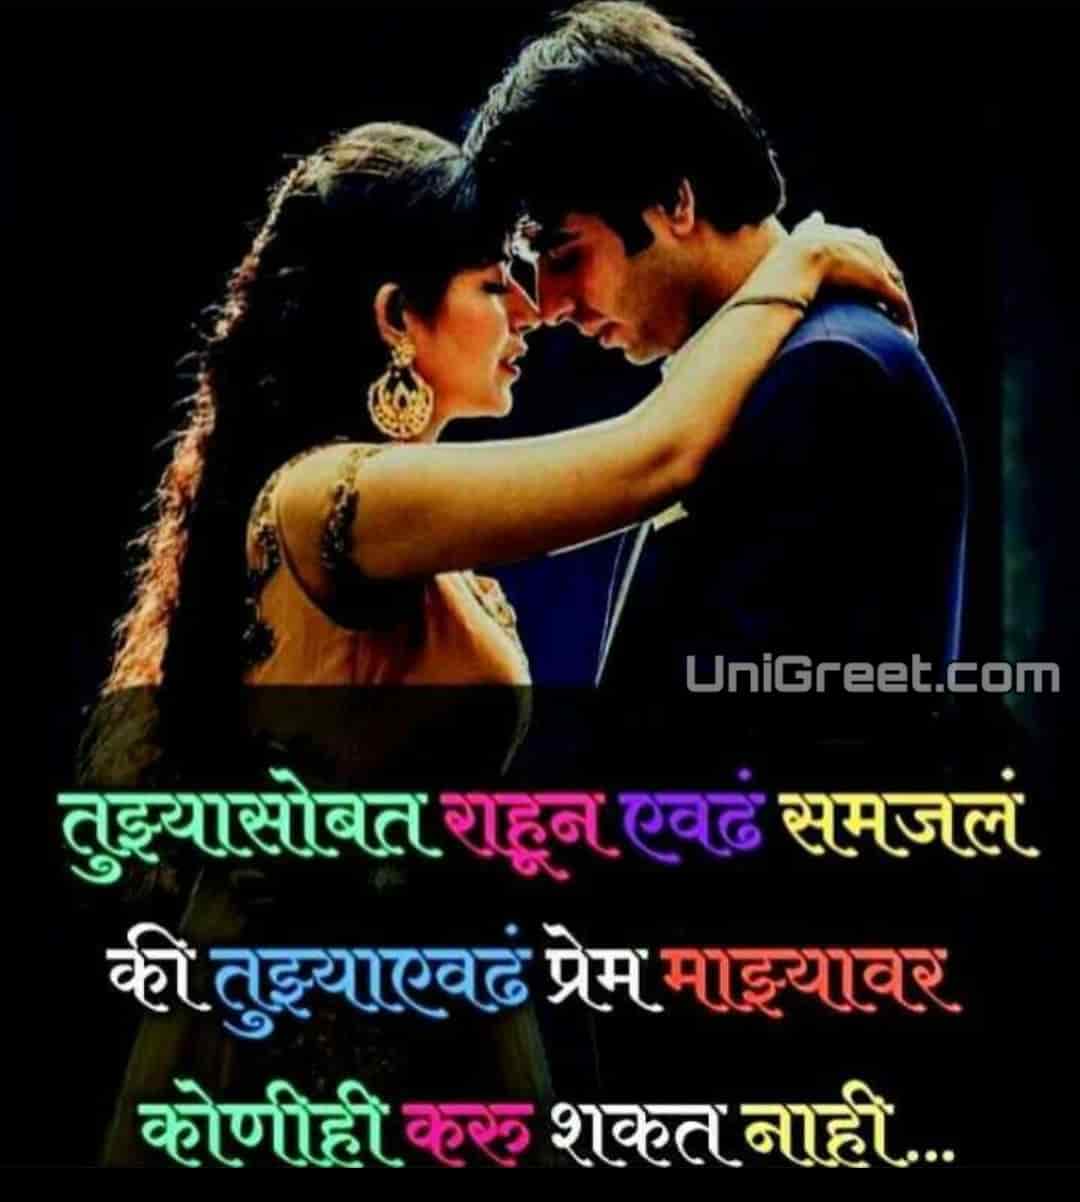 best love quotes in marathi for girlfriend